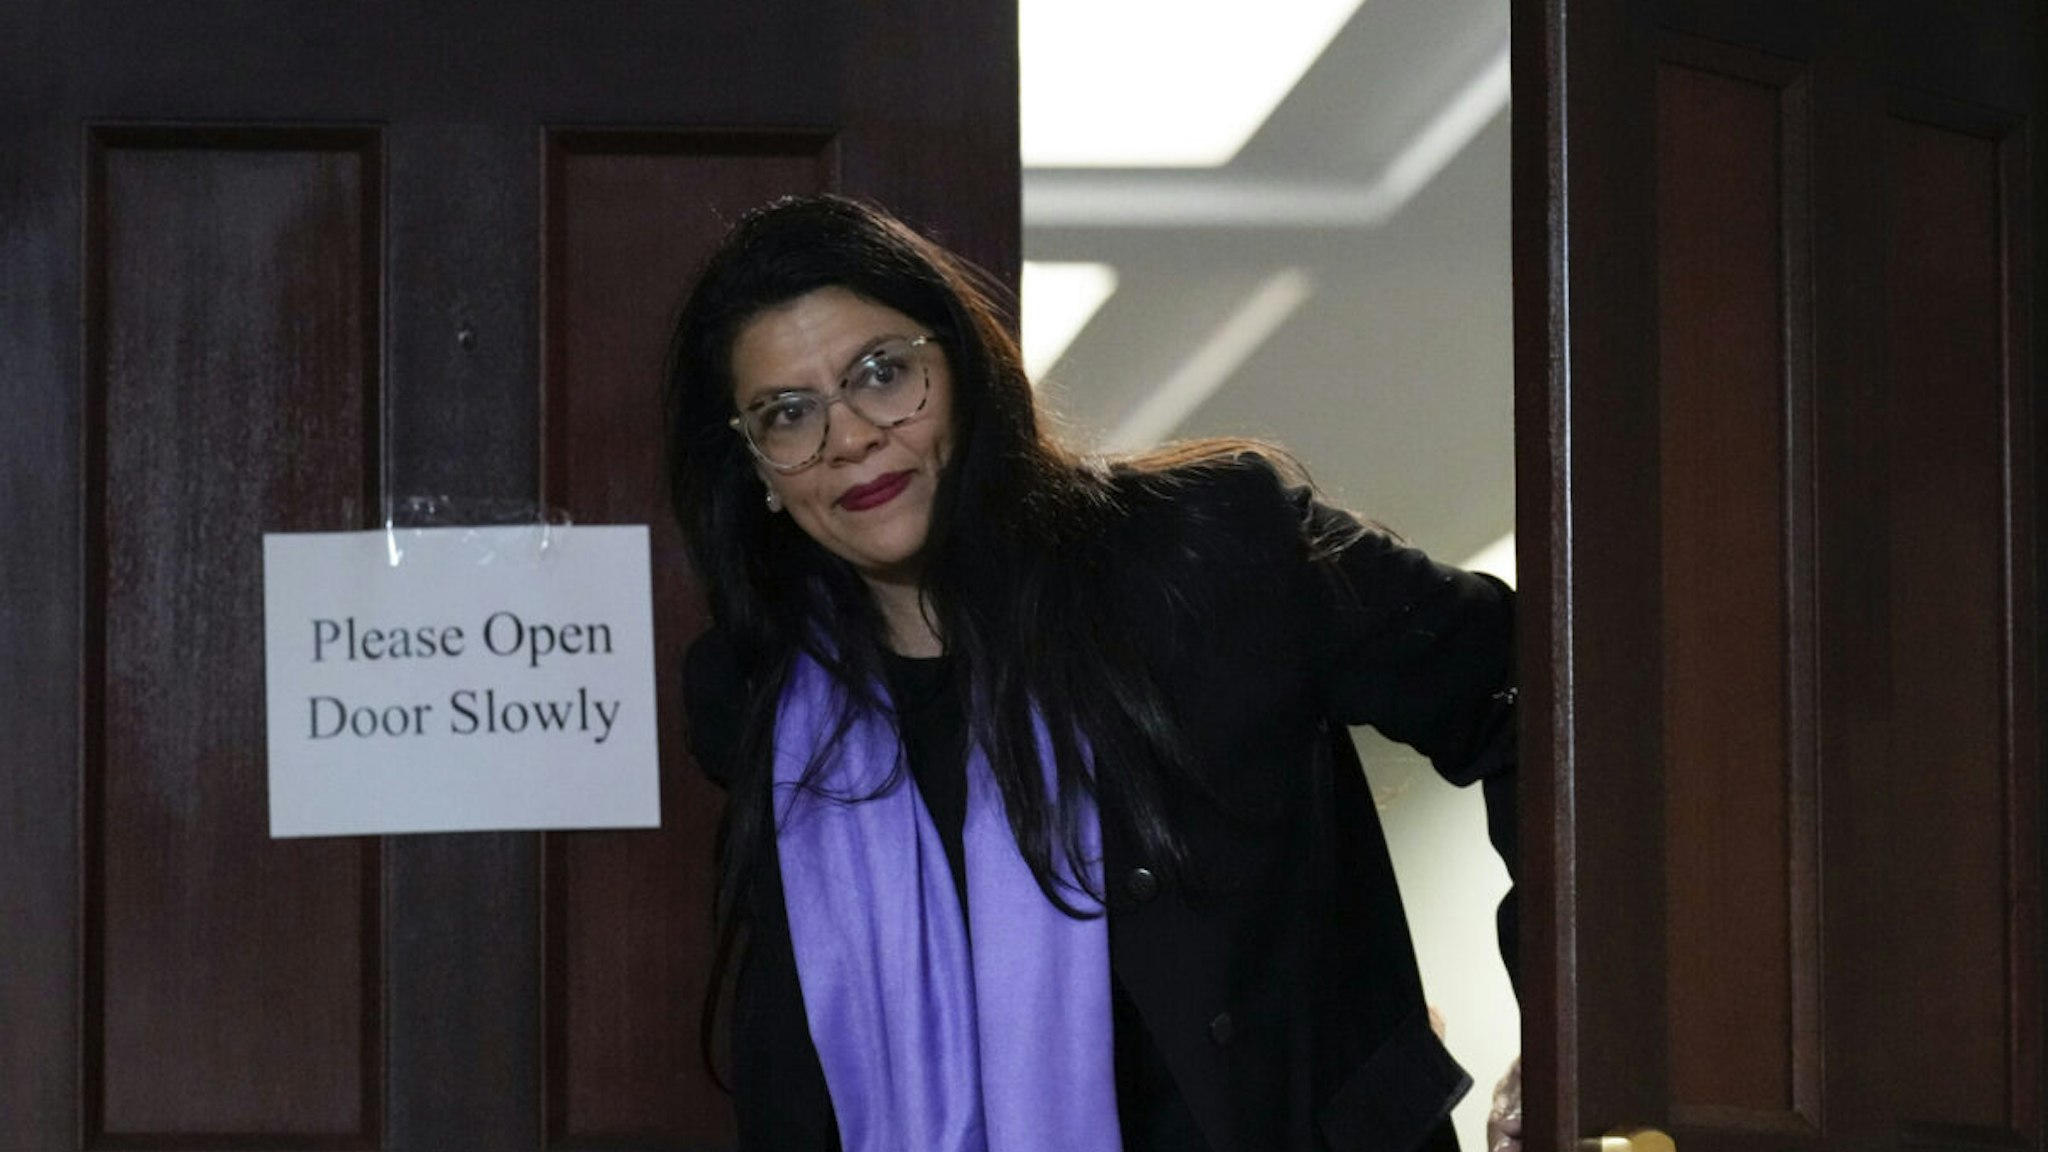 Rep. Rashida Tlaib (D-MI) leaves a meeting with House Democrats at the U.S. Capitol November 17, 2022 in Washington, DC. Speaker of the House Nancy Pelosi (D-CA) announced on Thursday that she would not be the Democratic leader in the 118th Congress.